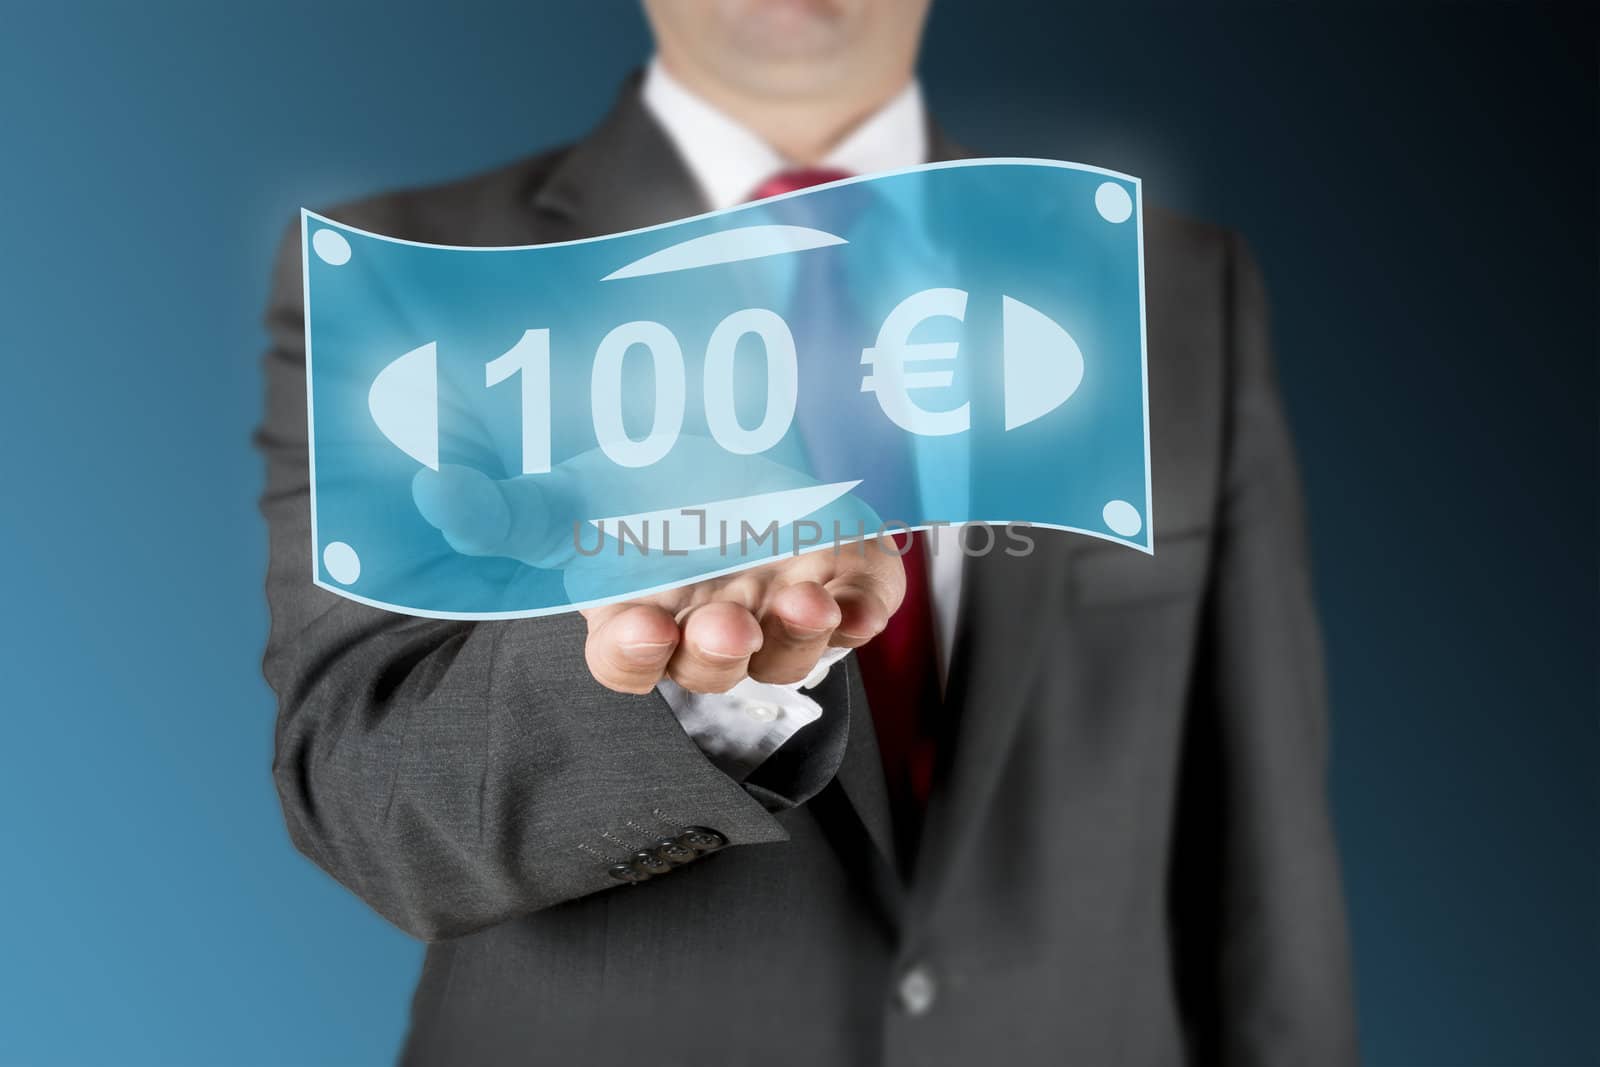 Well dressed business man is showing a illustrated100 Euro note on his outstretched arm. Background is blue/black.